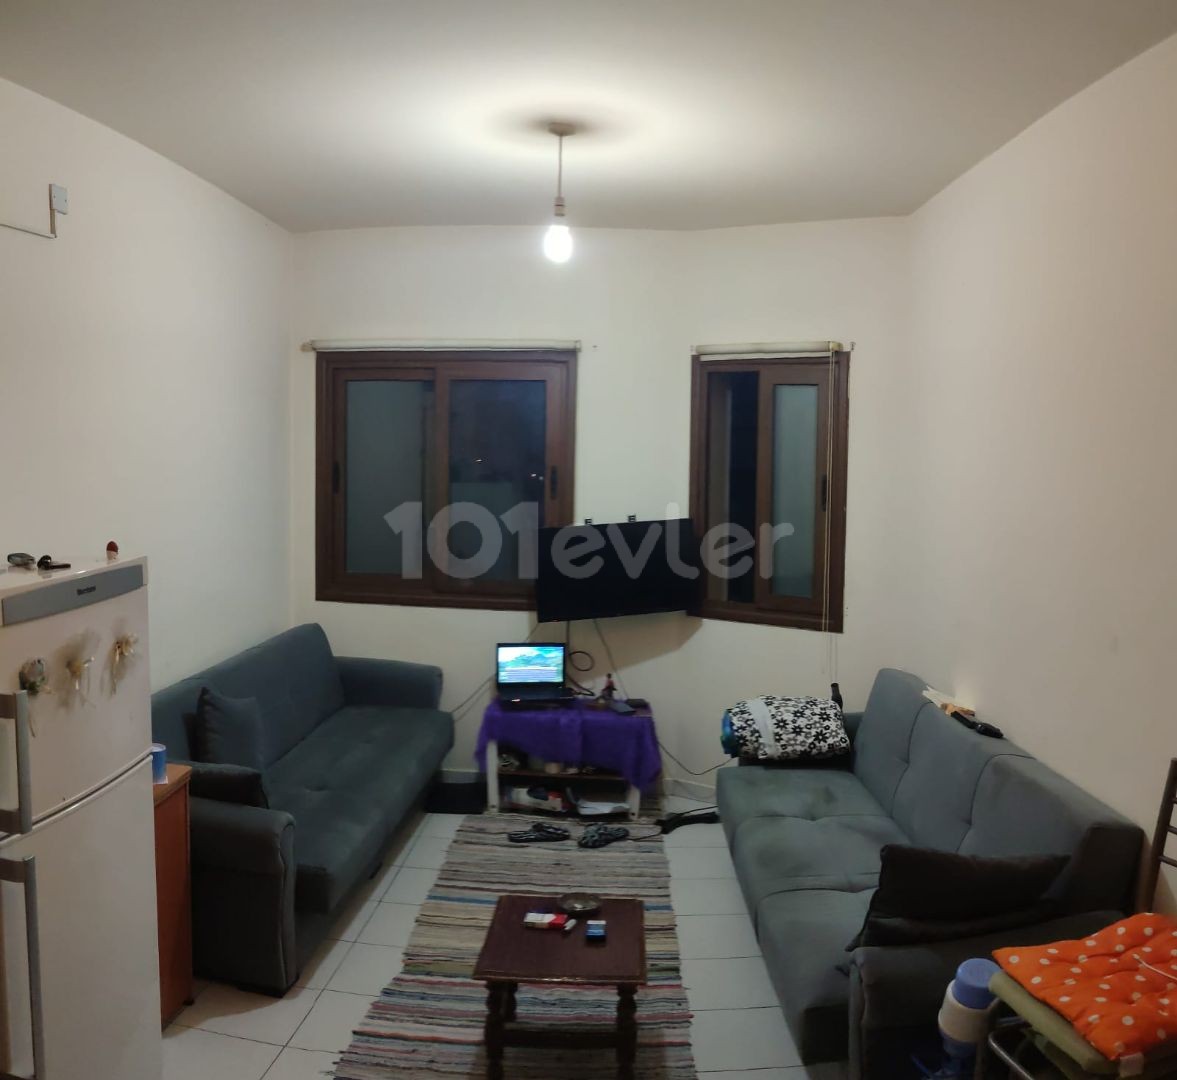 TURKISH MADE 2+1 FLAT FOR SALE IN GREAT LOCATION IN ORTAKÖY